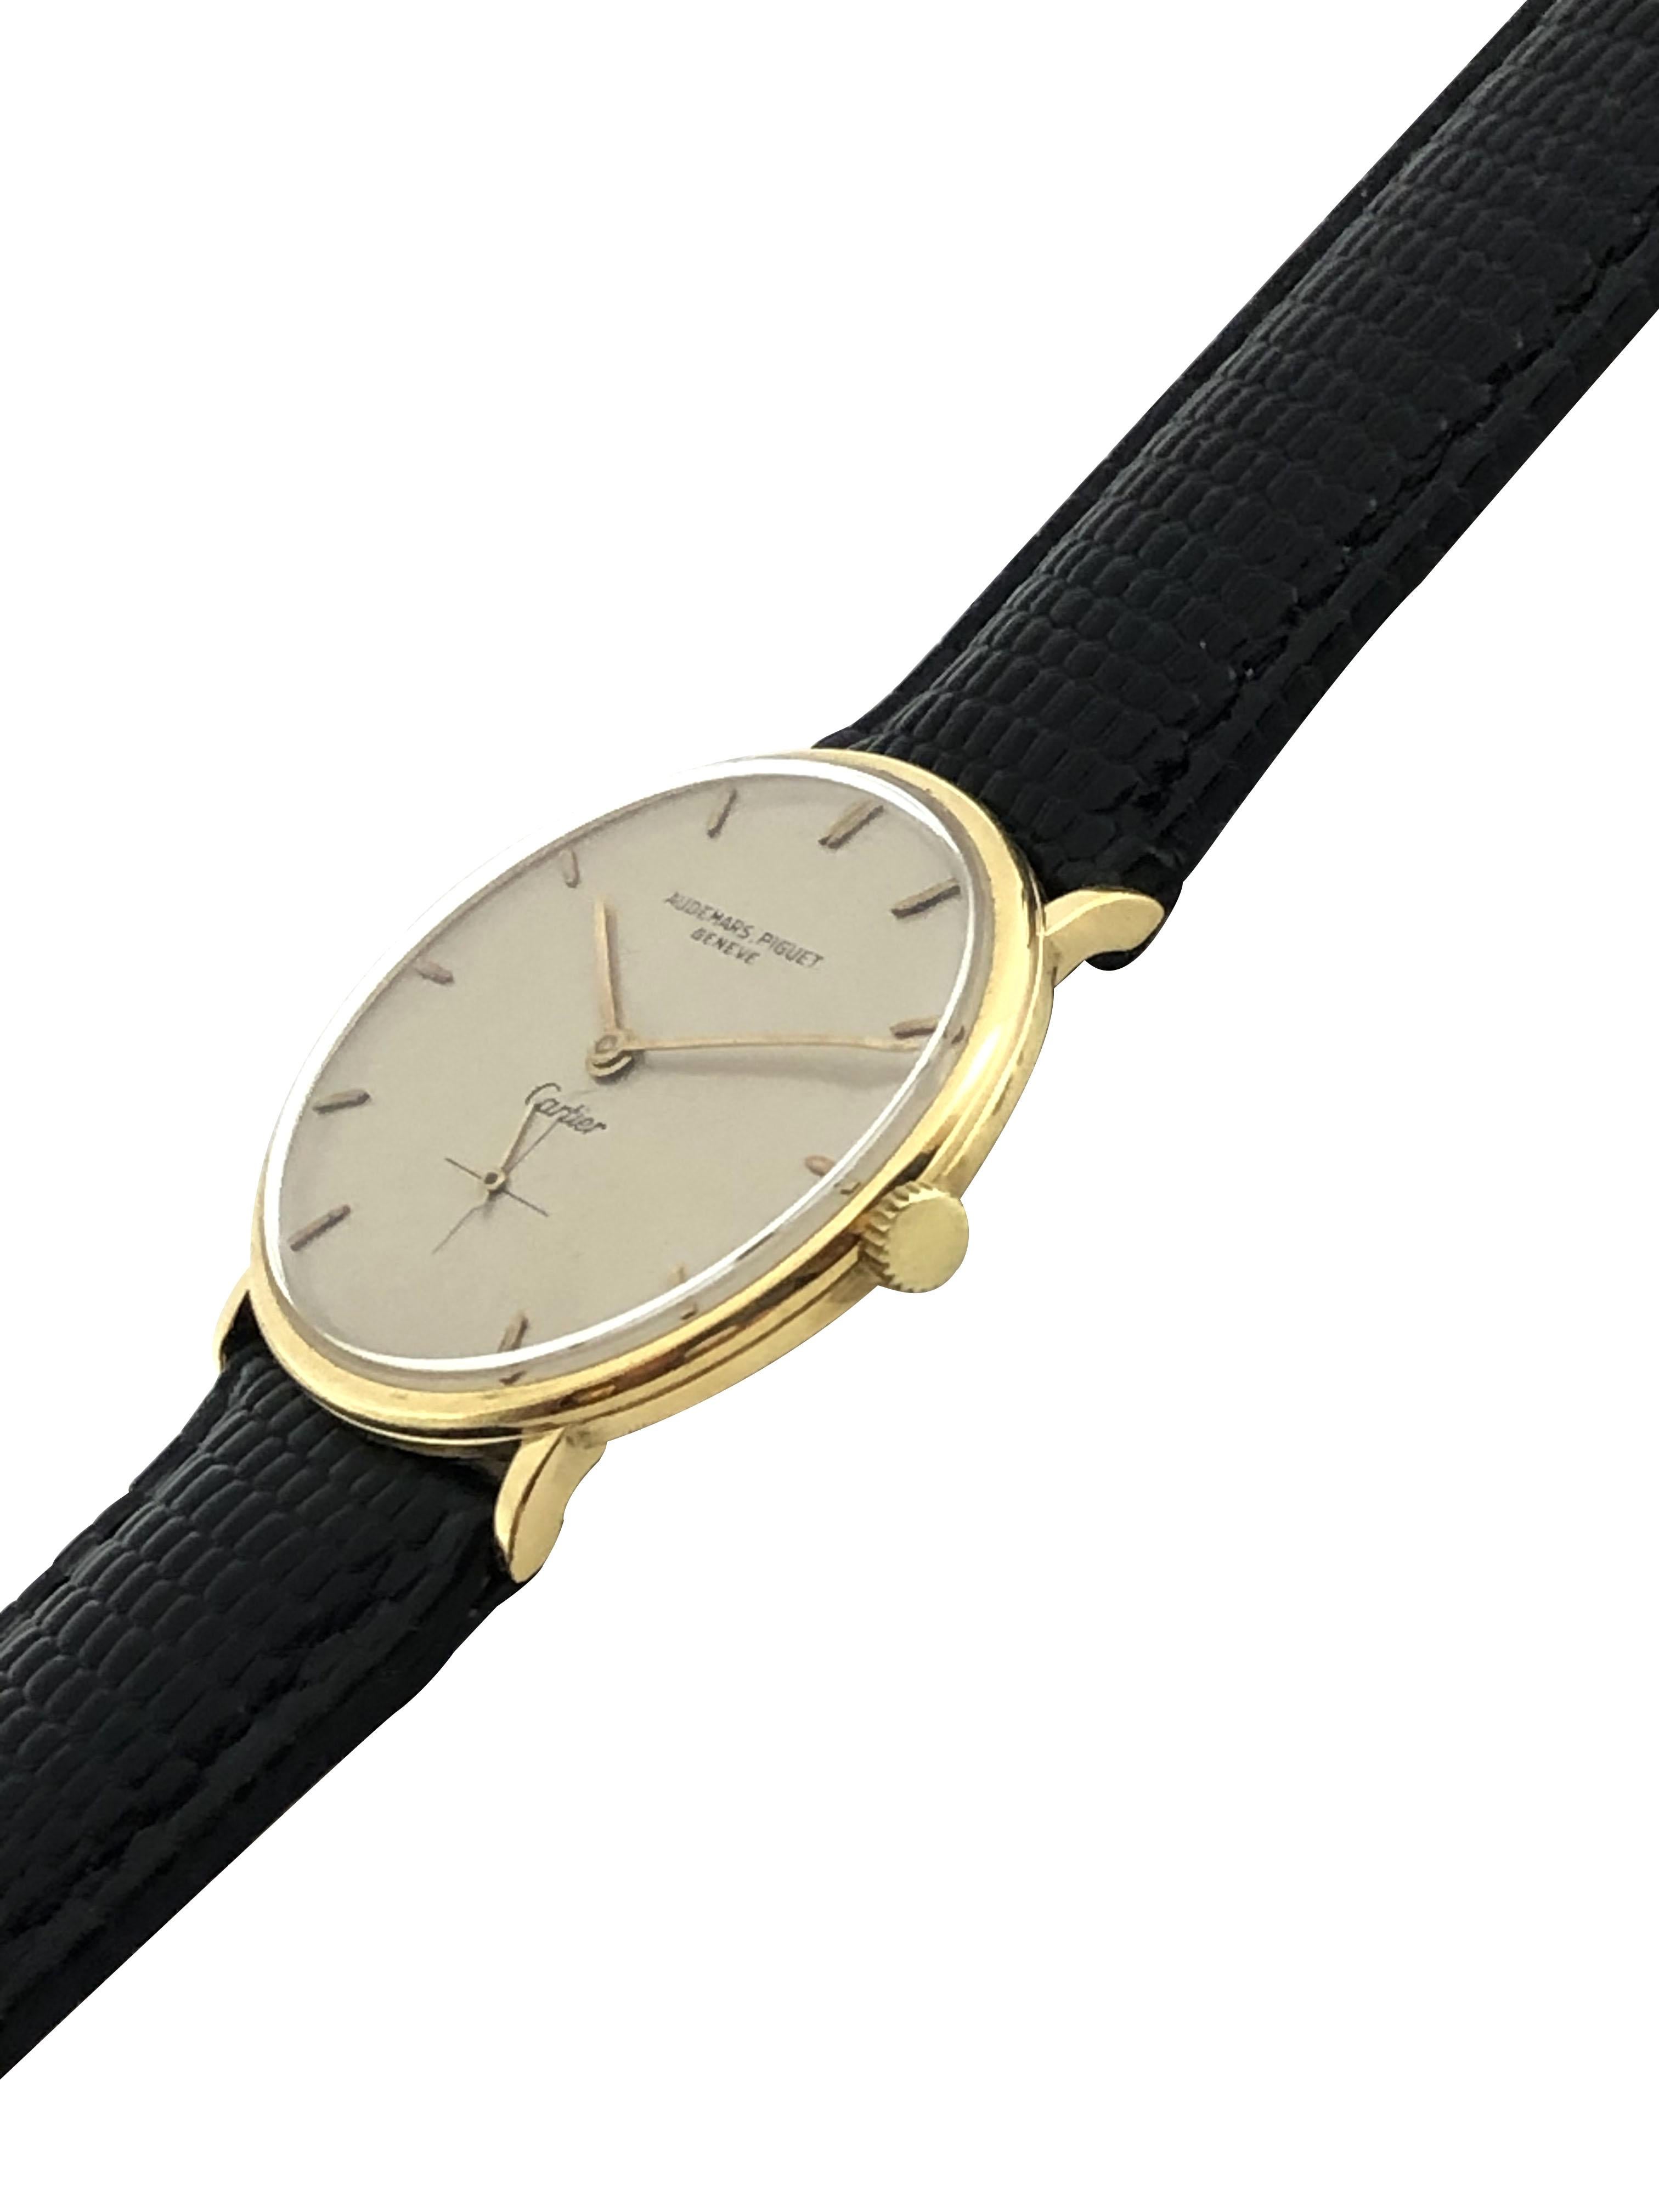 Circa 1950s Audemars Piguet Retailed by Cartier Wrist Watch, 32 M.M. 18K Yellow Gold 3 Piece case, 18 Jewel Mechanical, Manual wind Nickle Lever movement. Silver Satin Dial with Raised Gold Markers and a sub seconds sweep hand. New Hadley Roma Black